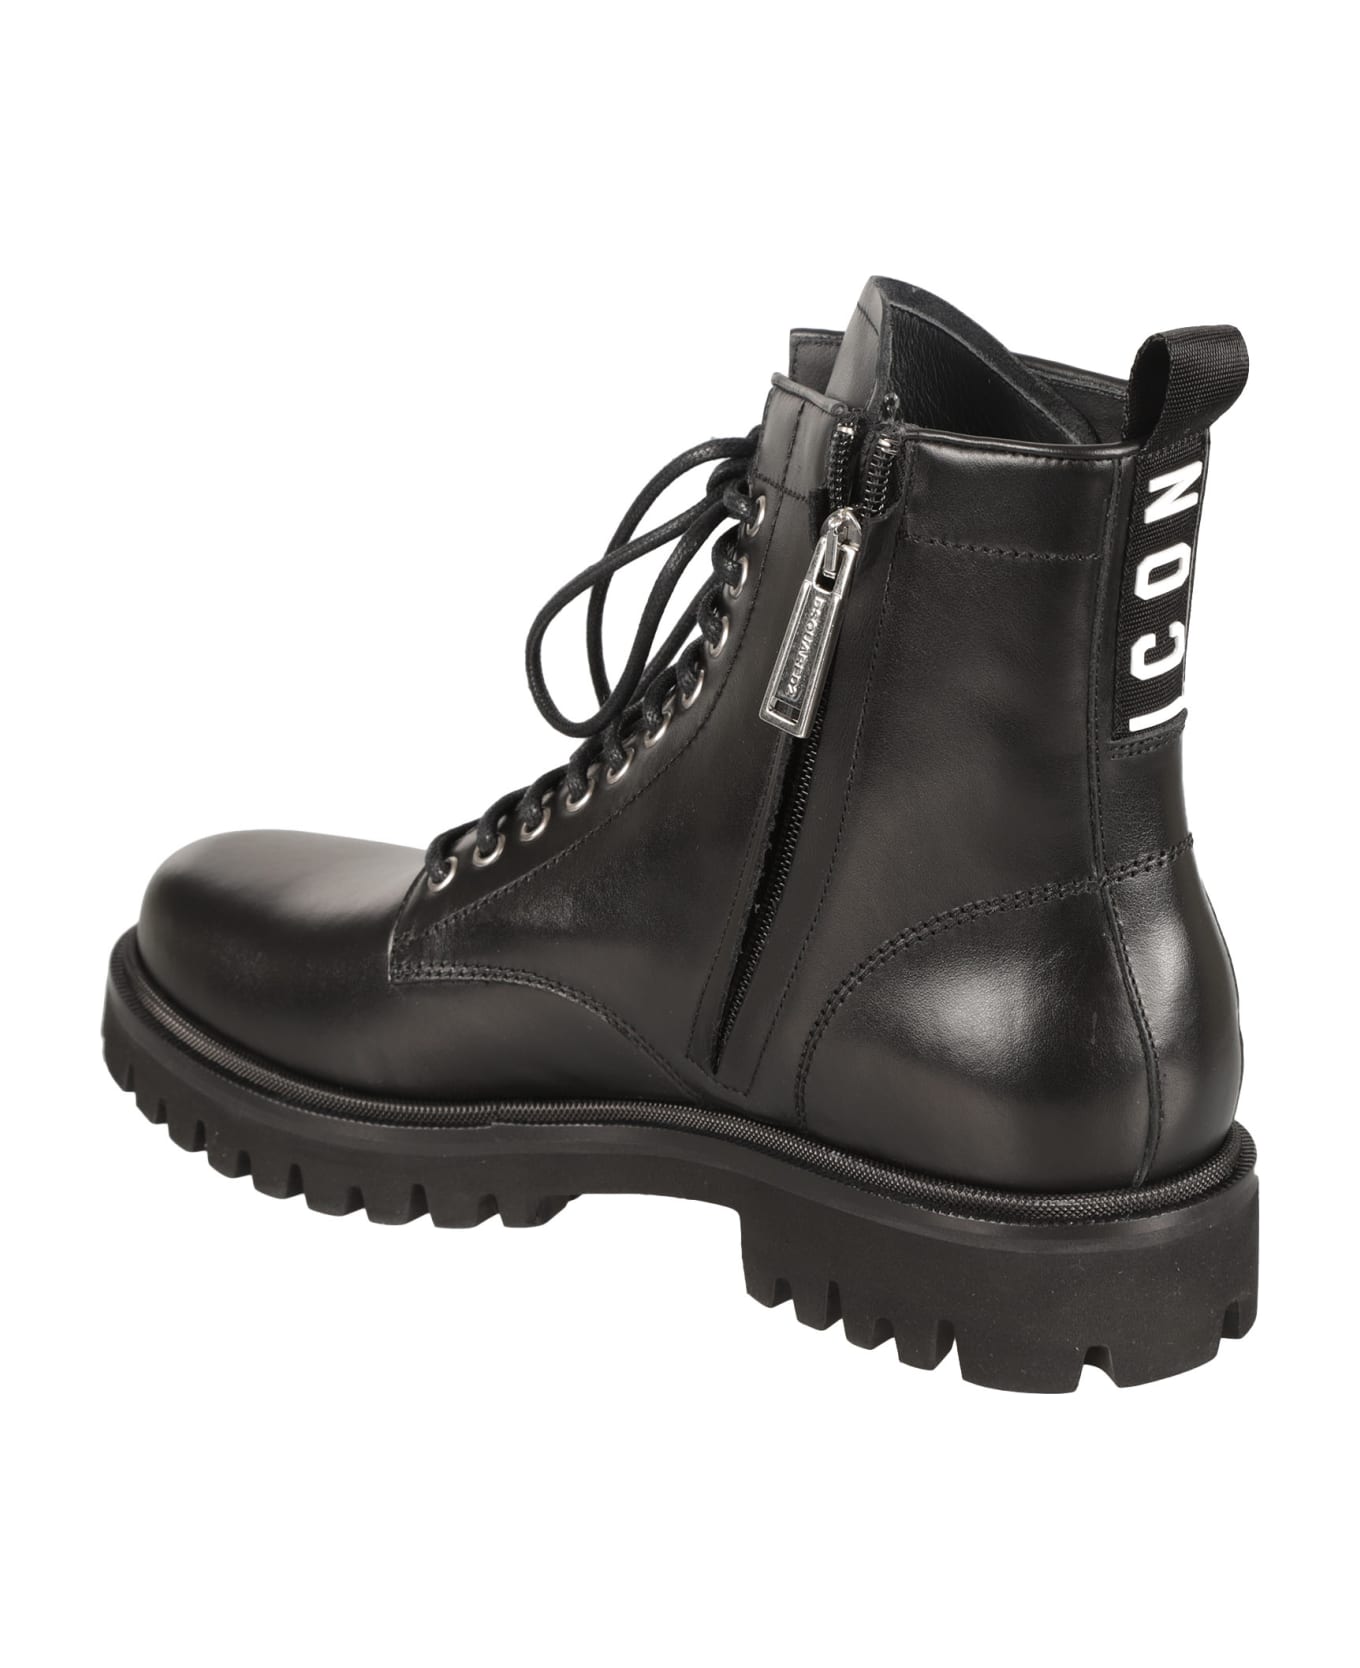 Dsquared2 Be Icon Combat Boots - Black ブーツ